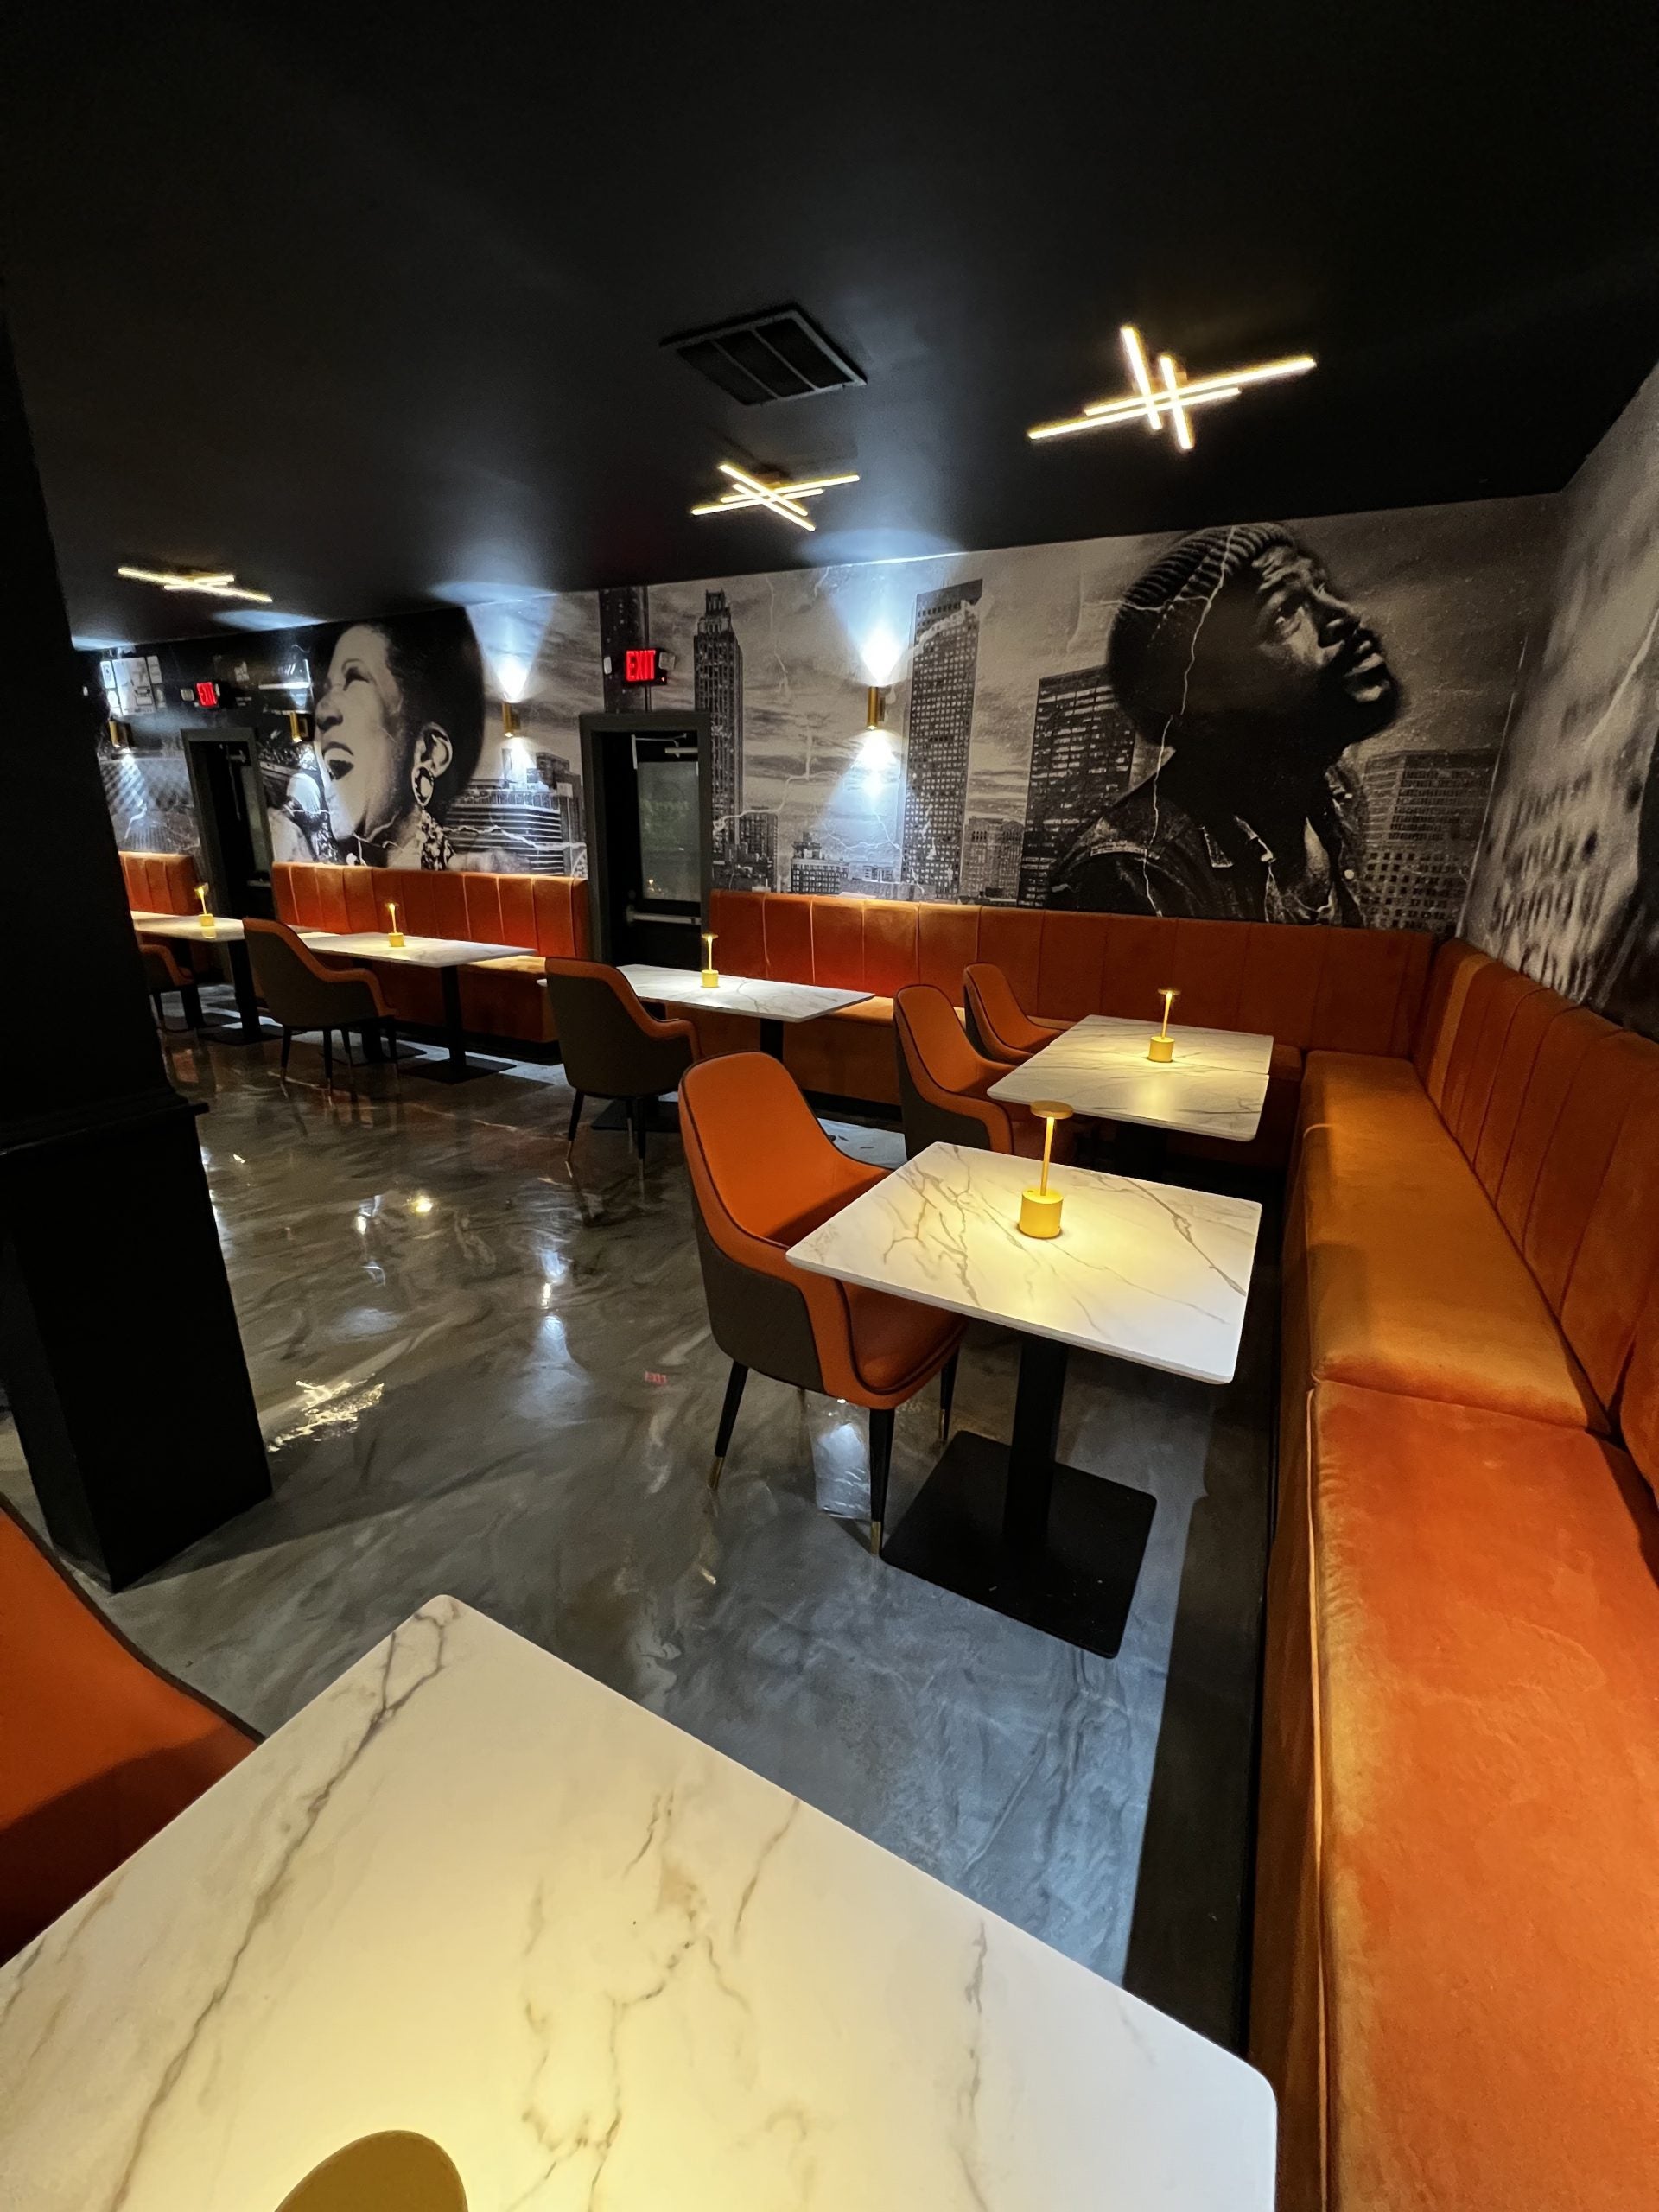 Lil Baby’s New Restaurant Opens In Atlanta, Features An Interior Designed By A Black Woman